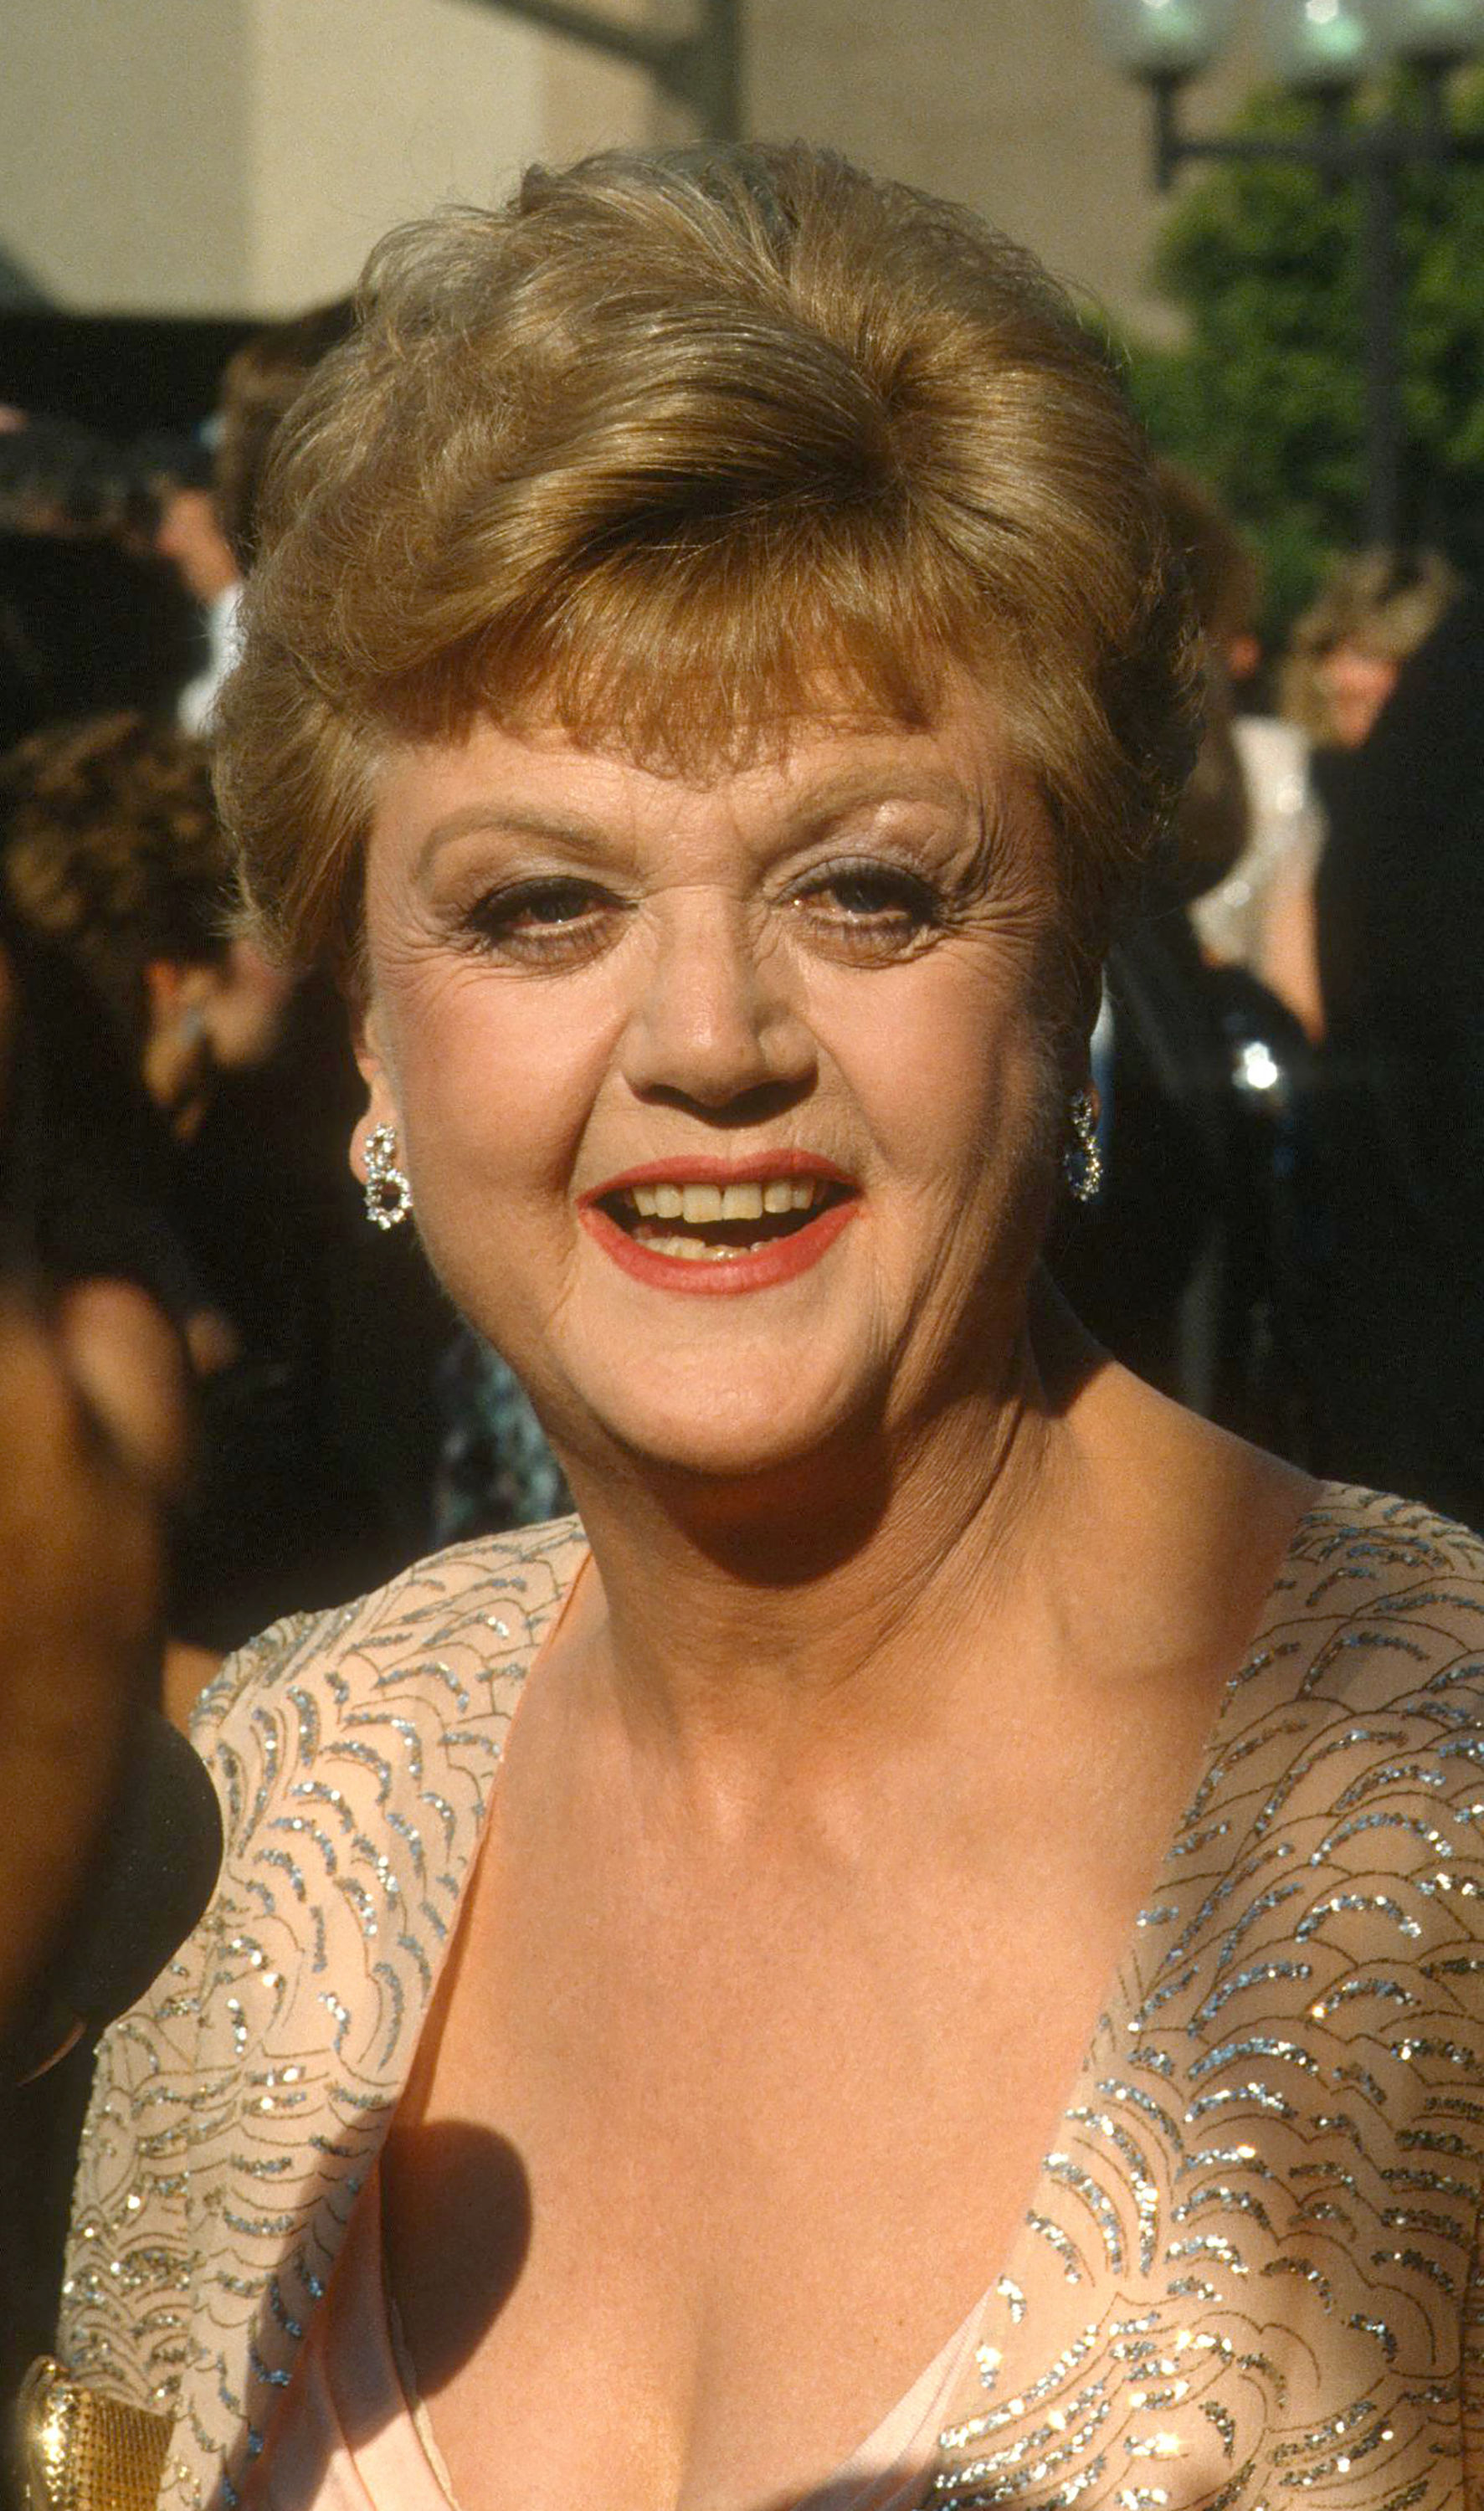 Angela Lansbury smiles in a beaded gown at an event